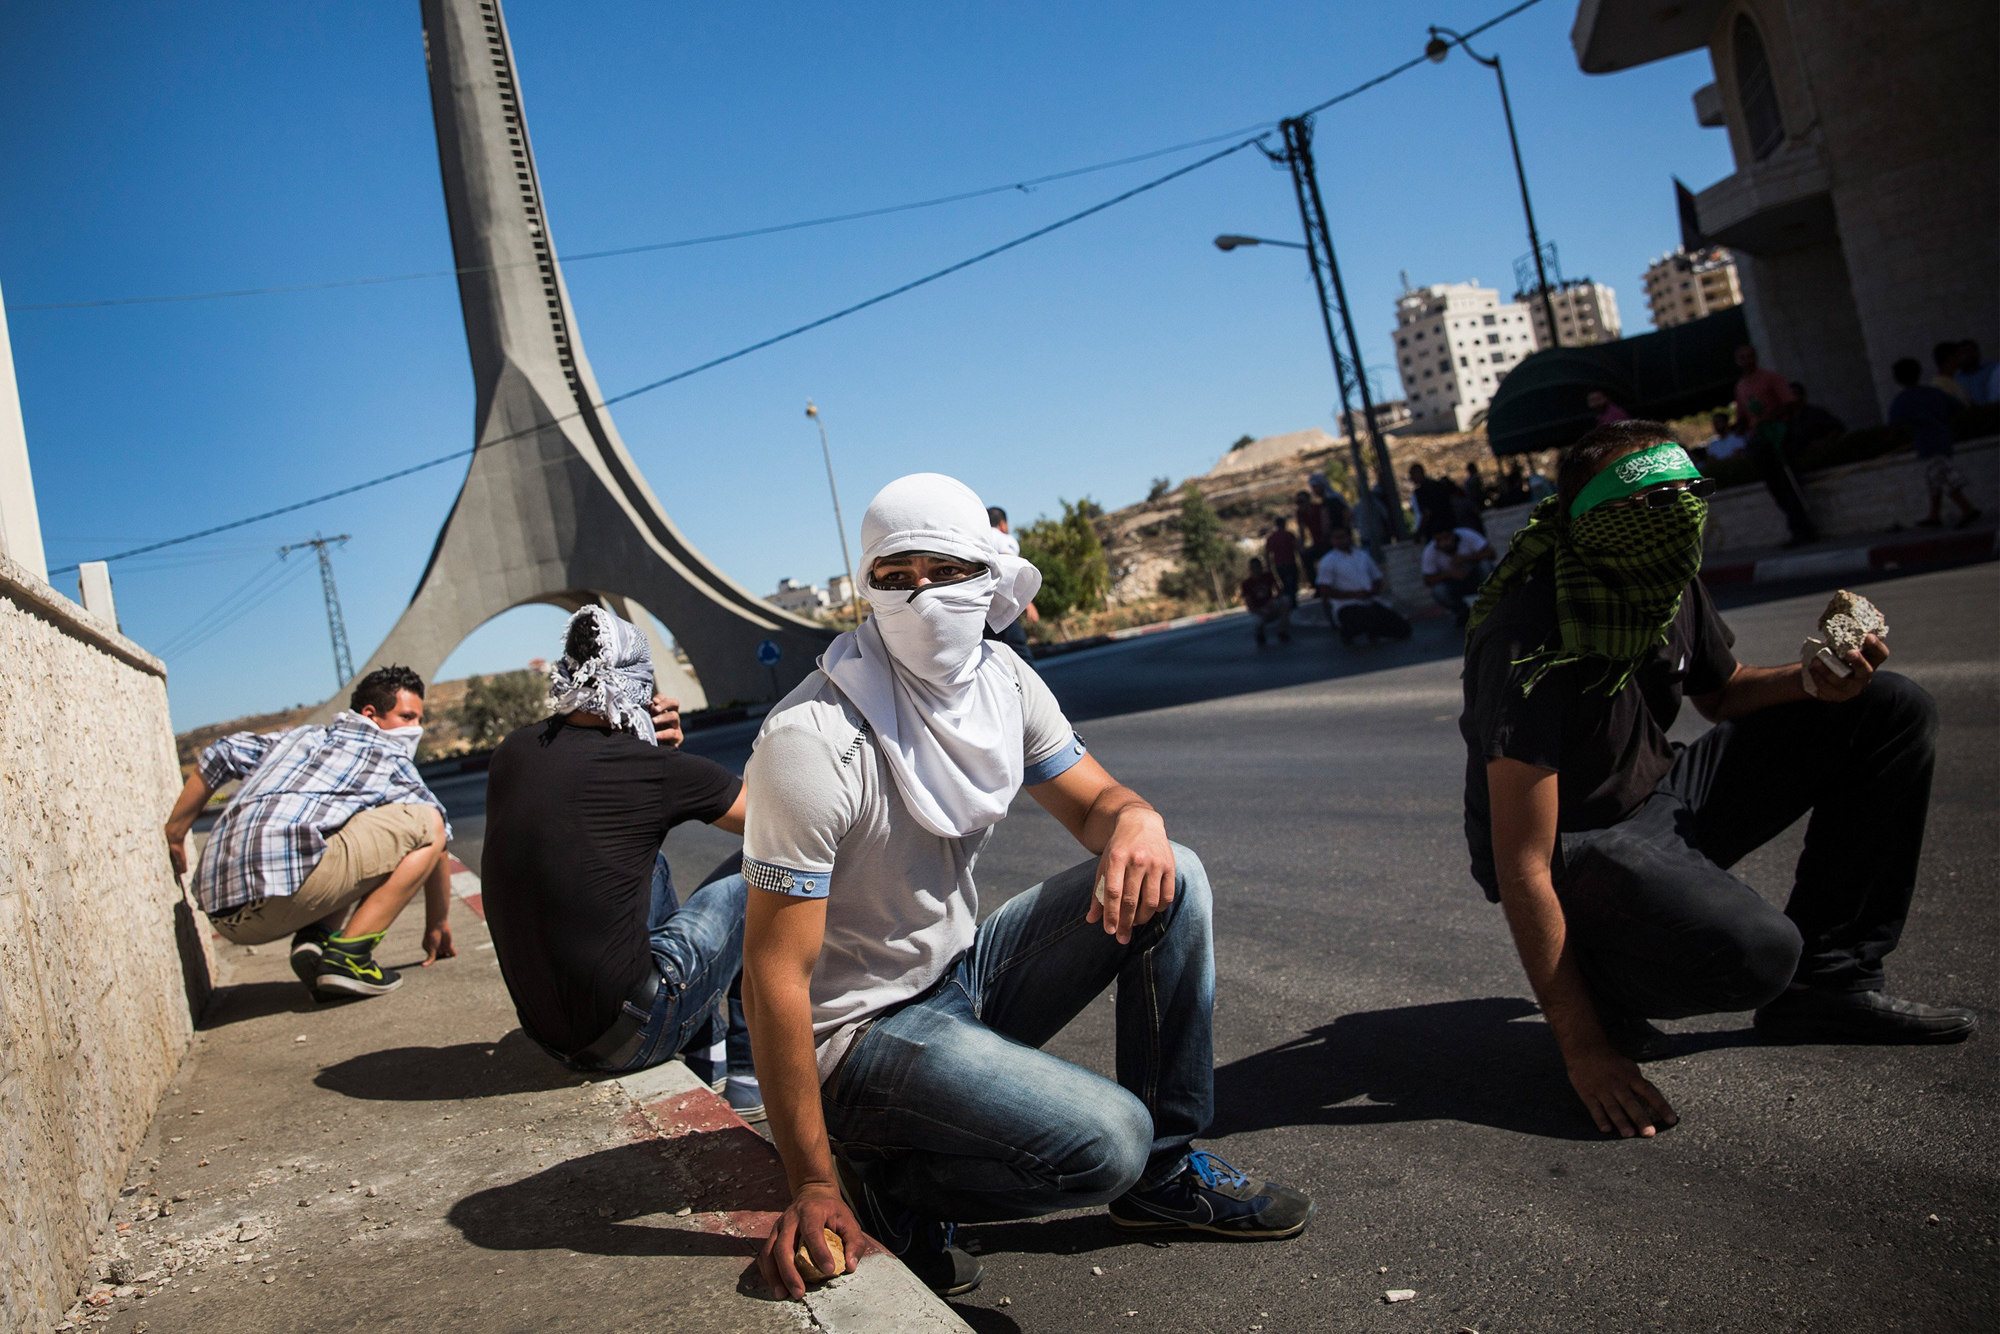 Palestinian supporters of Hamas take shelter while clashing with Israeli security forces on July 25, 2014 near Ramallah, West Bank. (Andrew Burton—Getty Images)